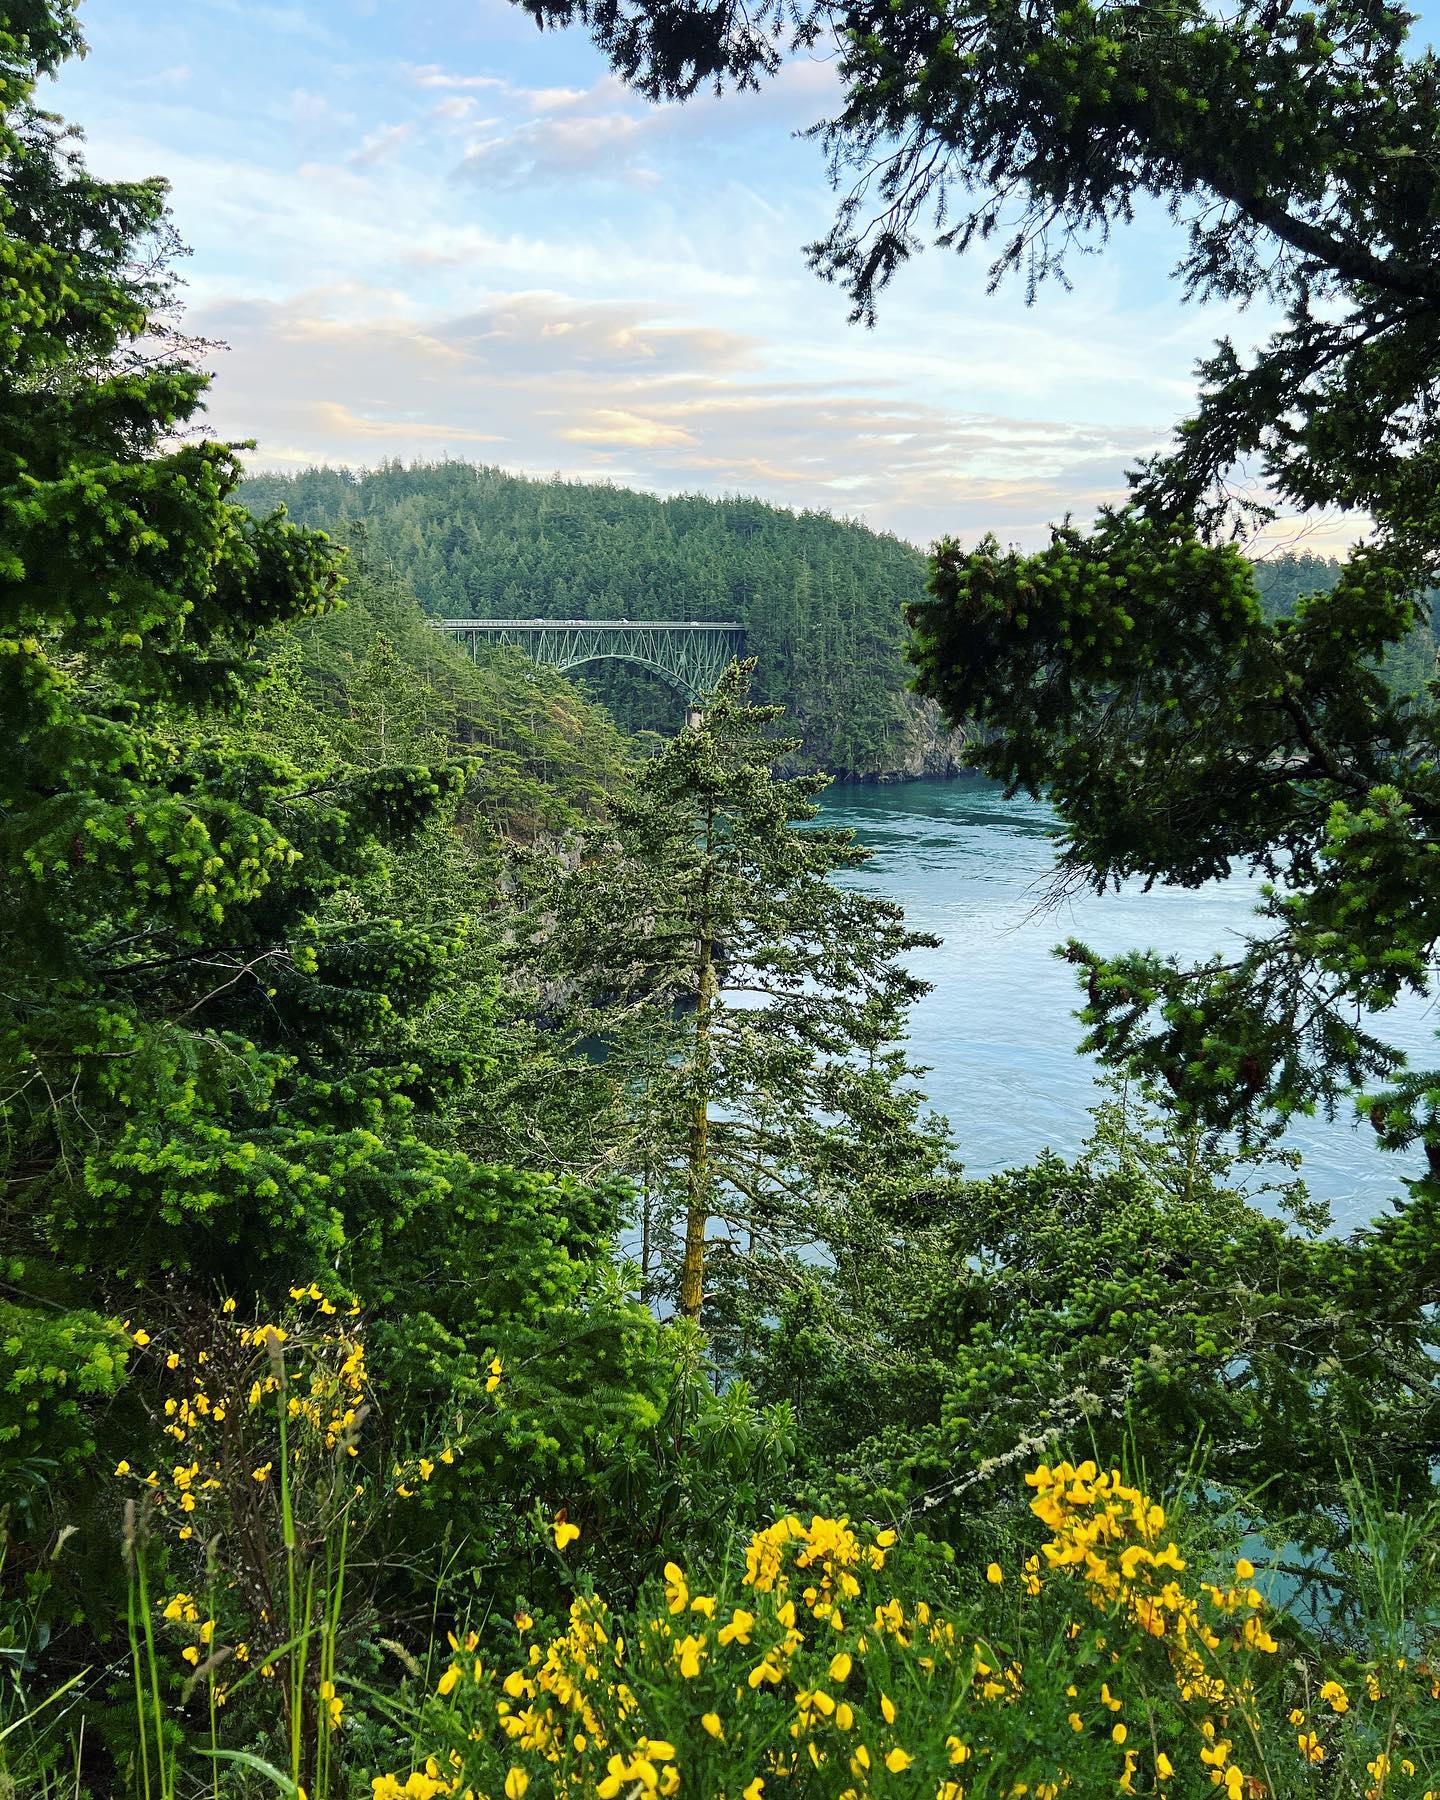 We’re back from our road trip! We saw so many beautiful things so be prepared for a photo dump over time 😉 Our journey started in beautiful Deception Pass state park in Washington, which is actually not far from where we live in BC at all.
.
.
#roadtrip #washingtonstate #oakharbor #deceptionpassstatepark #bridge #views #sunset #flowers #spring #pnw #pacific #camperlife #camper #campertrip #nature #crossing #bridge #washington #vancouver #statepark #camping #travel #instagood #reizen #rondreis #amerika #usa #reisfotografie #reistypje